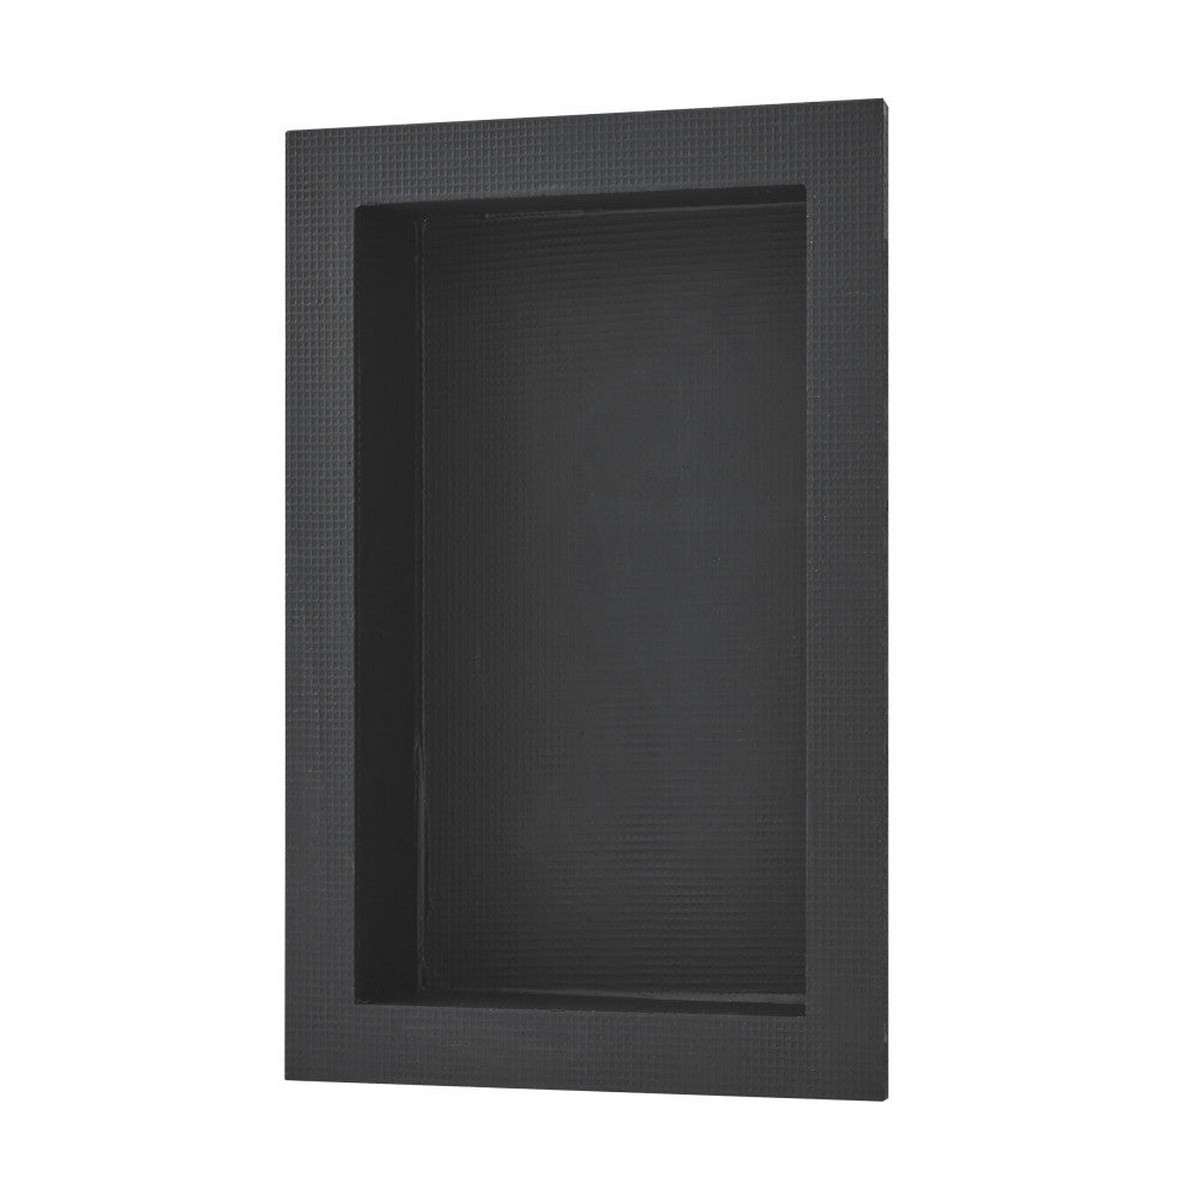 SWISS MADISON CT-SWN100 DOVER 16 INCH SINGLE SHELF RECTANGLE WALL NICHE IN MATTE BLACK